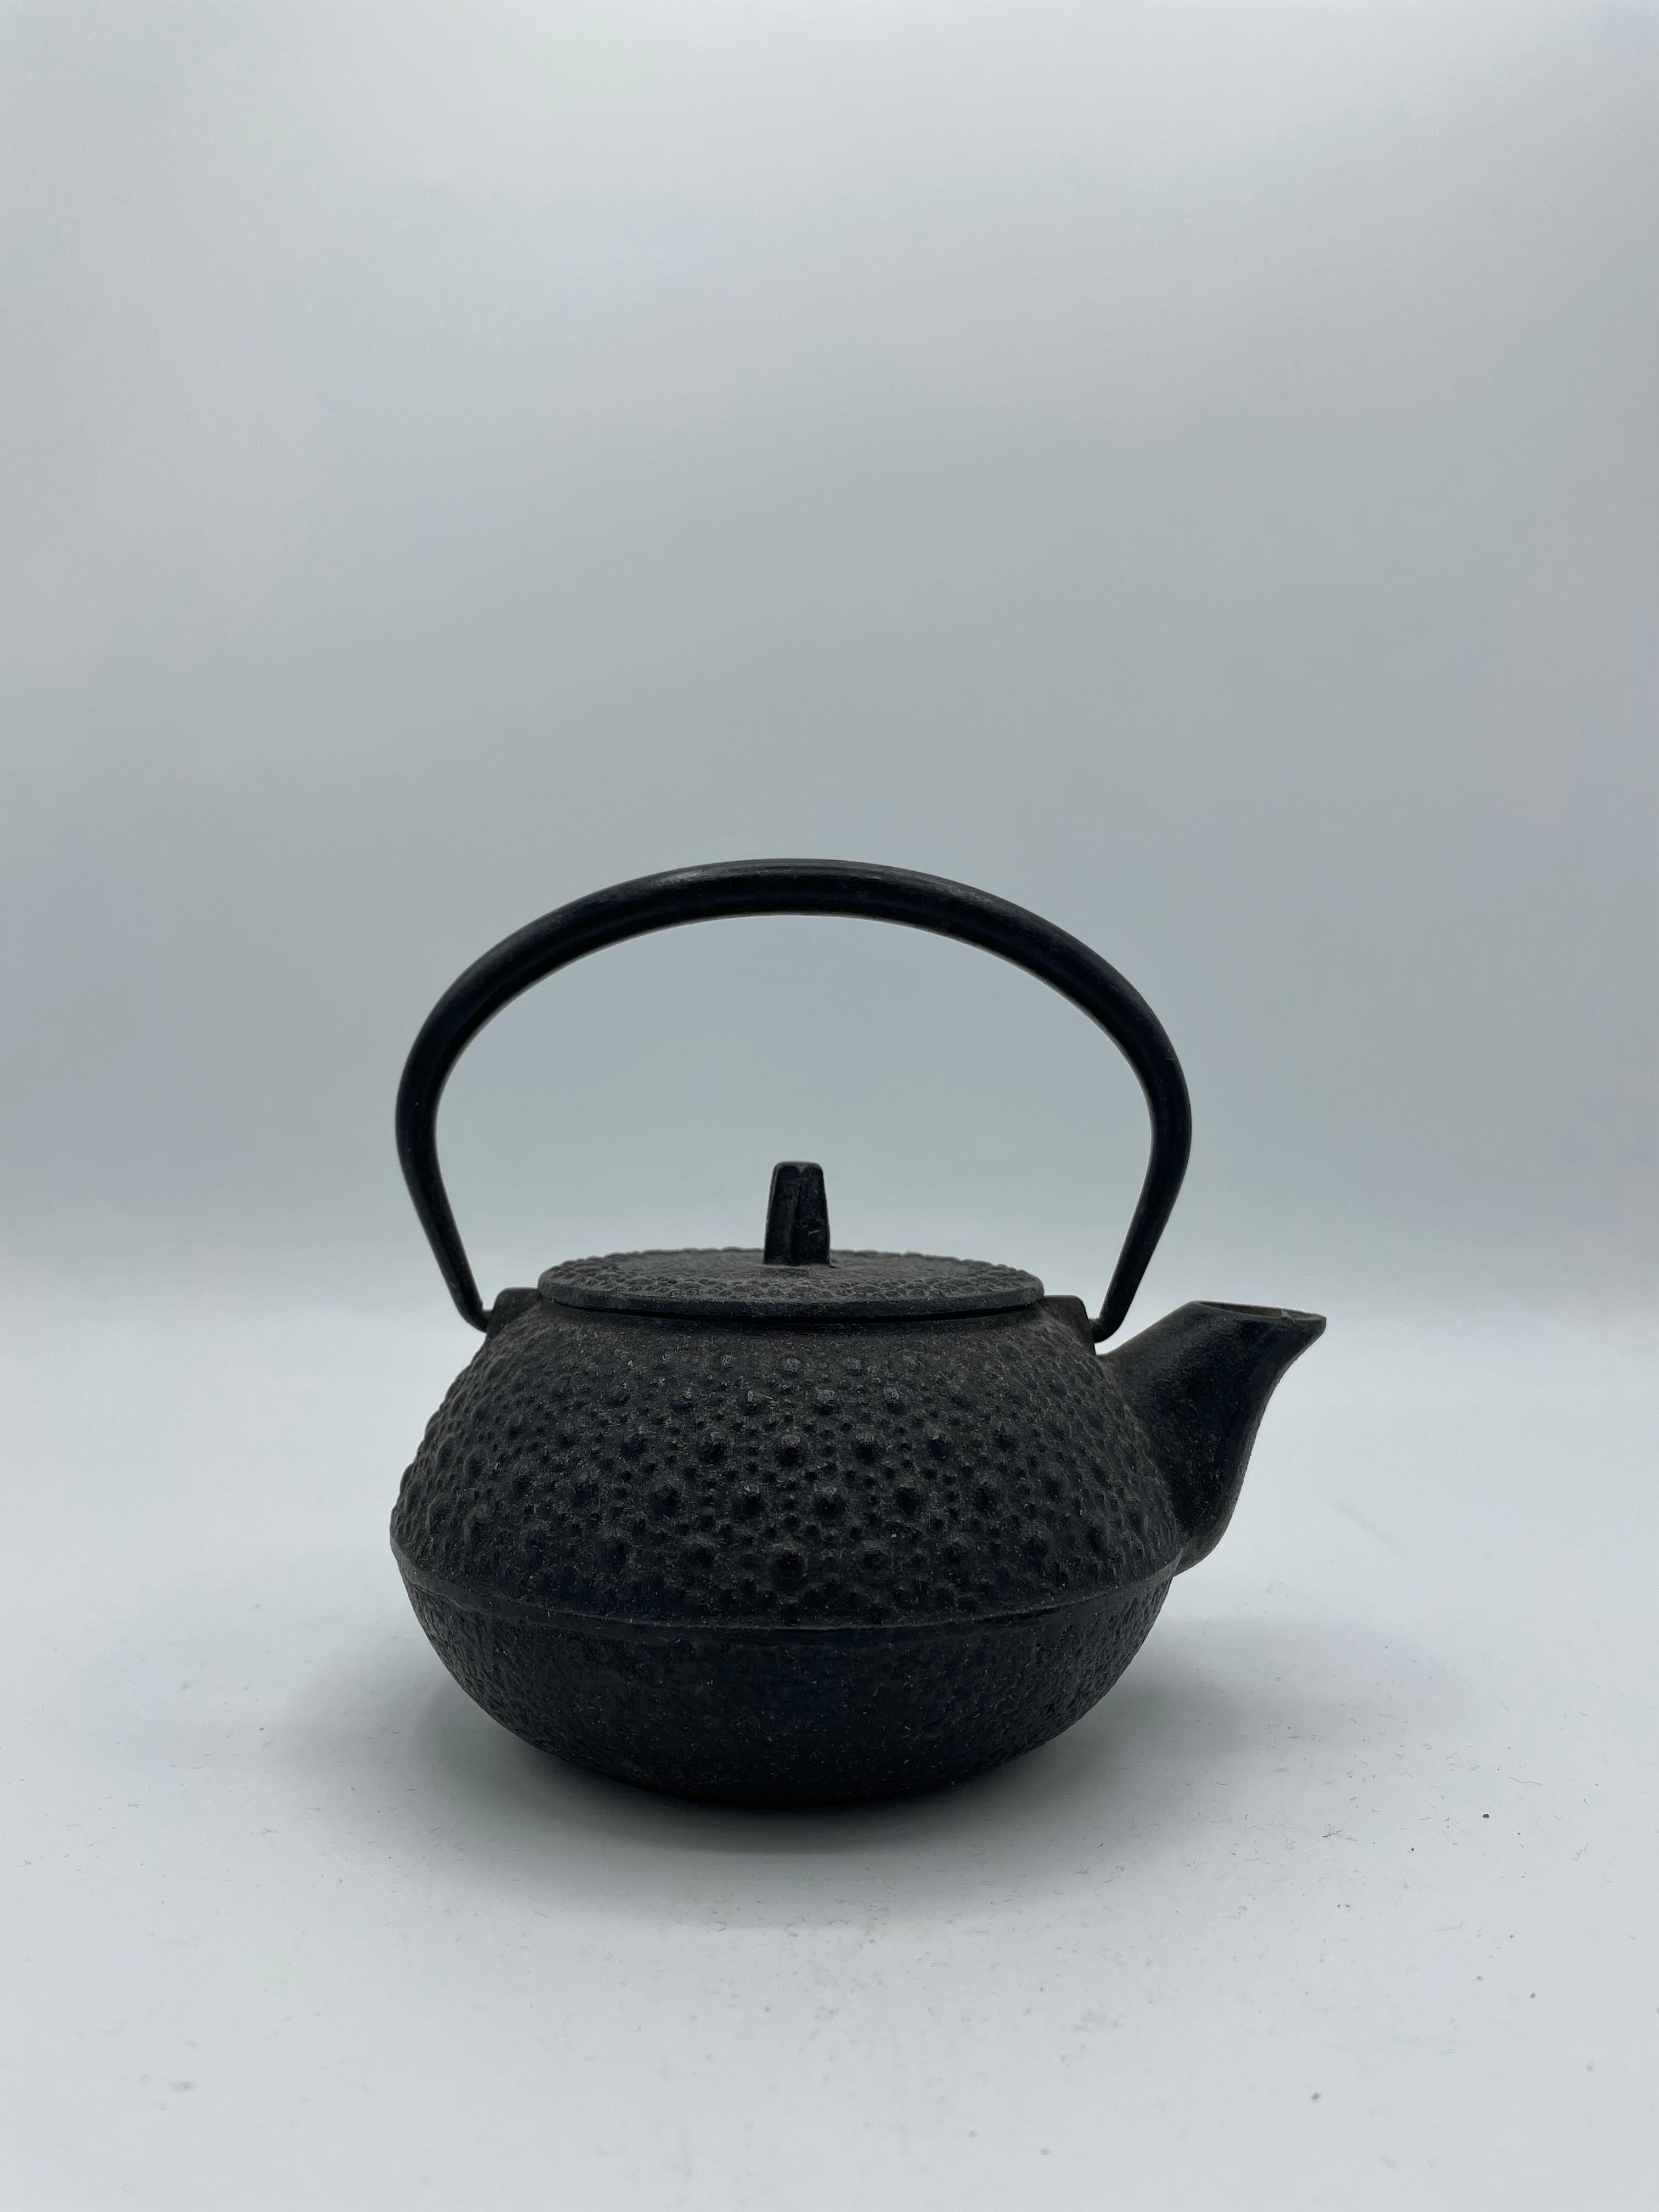 Cast Iron Wood Stove Kettle Steamer with Acorn Design